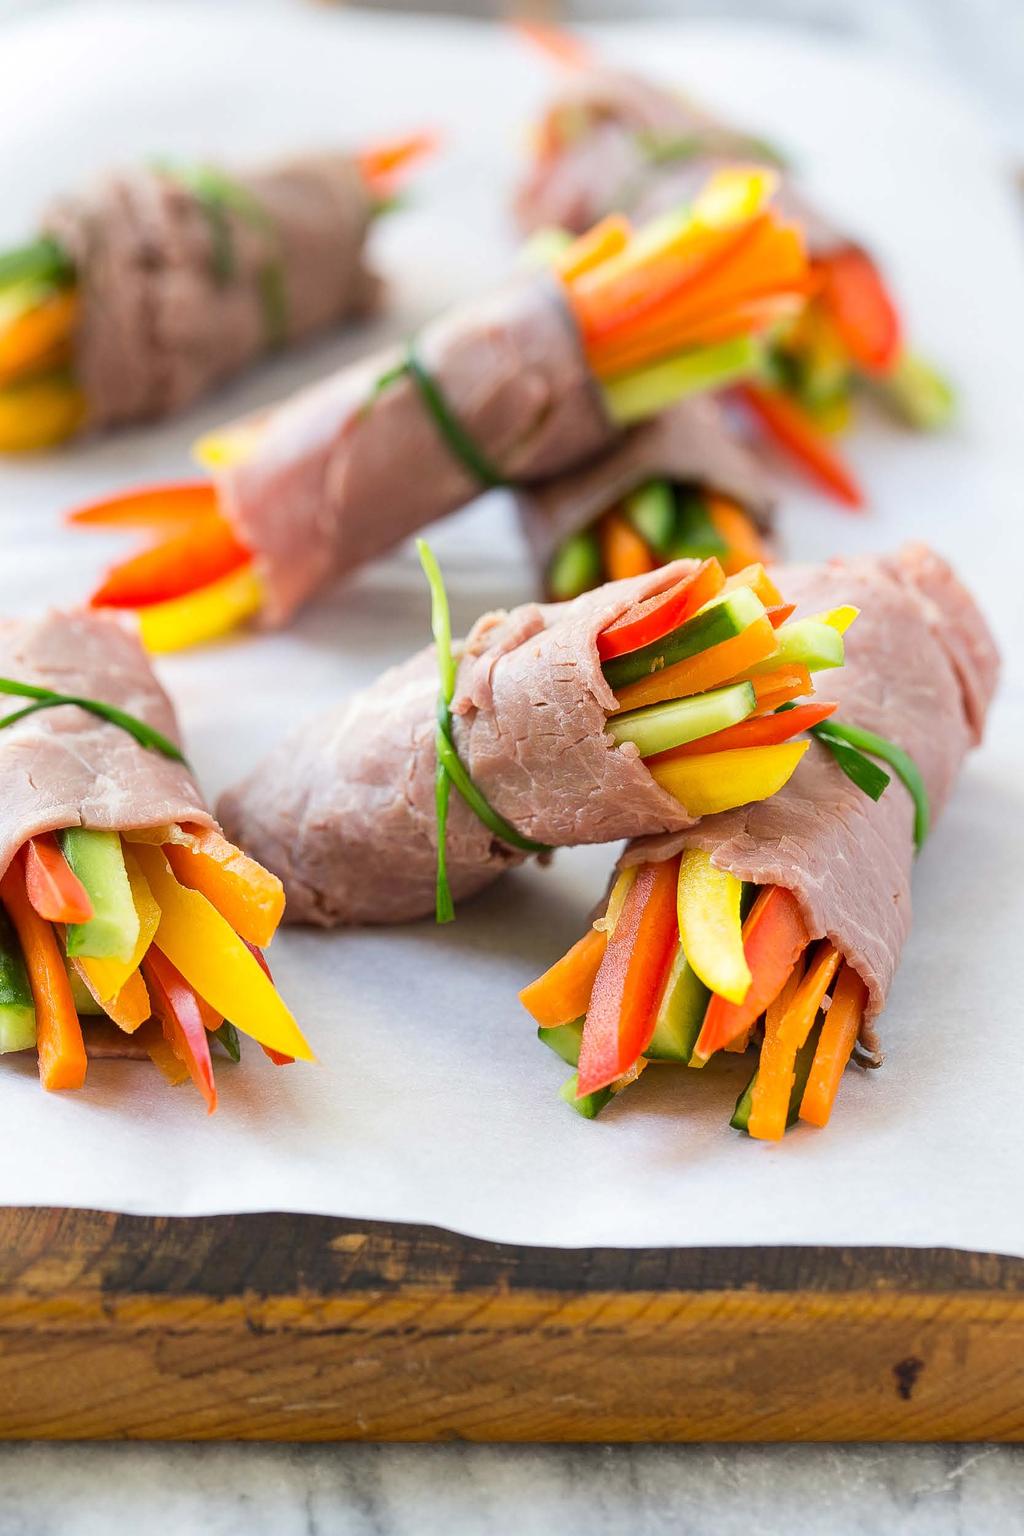 13. Roast Beef Wraps Thin slices of roast beef wrapped around slices of crisp and colorful vegetables. You can substitute turkey instead of roast beef if you prefer.